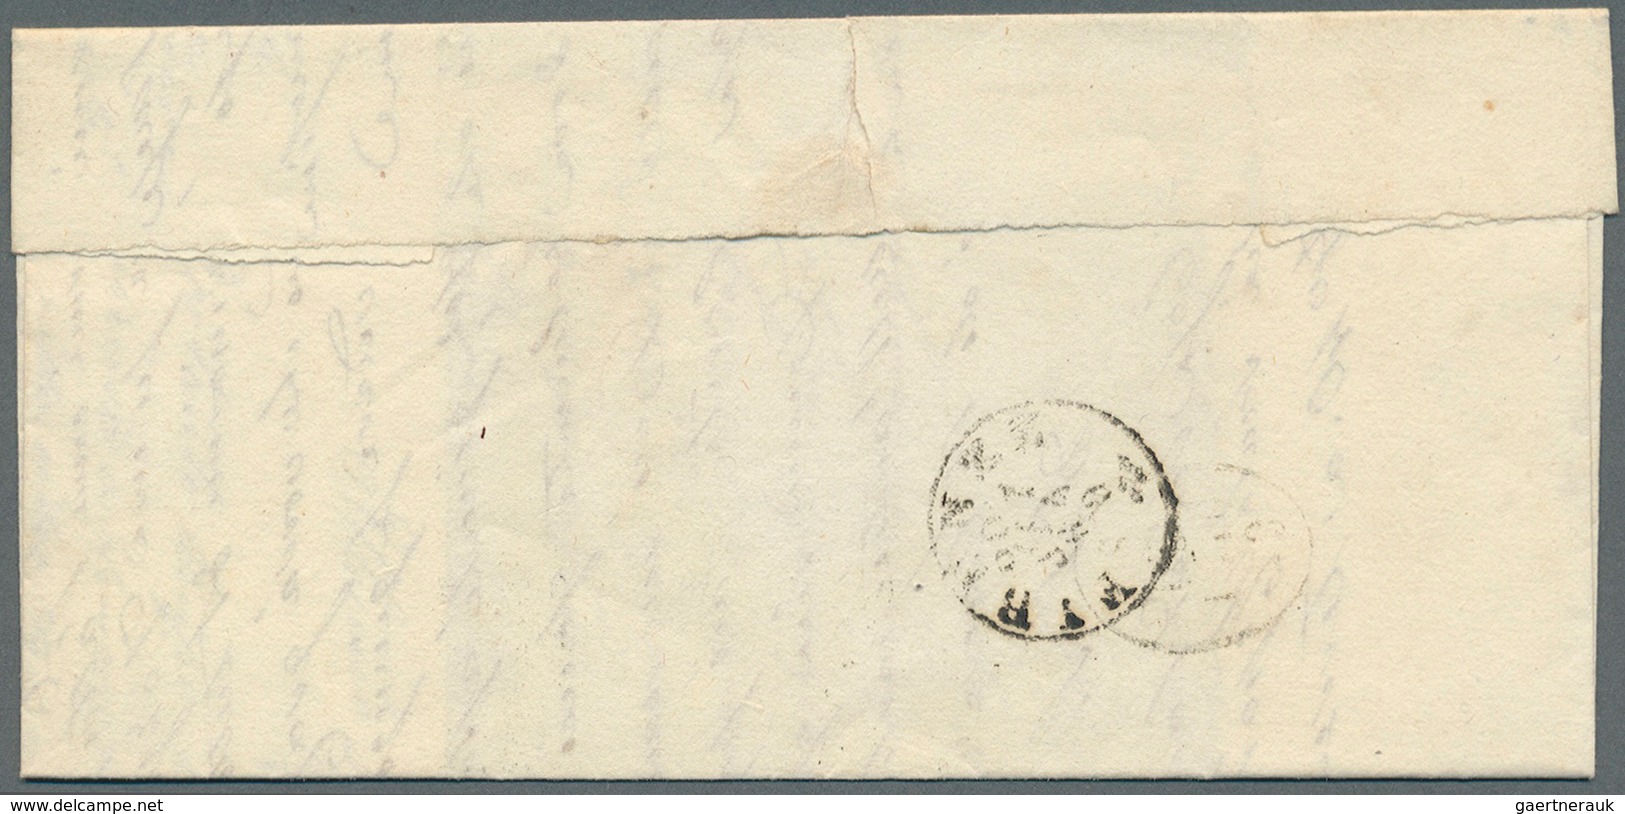 Italien - Portomarken: 1863/1868 Five Letters With Non Canceled Porto Stamps (clearly Visible Differ - Taxe